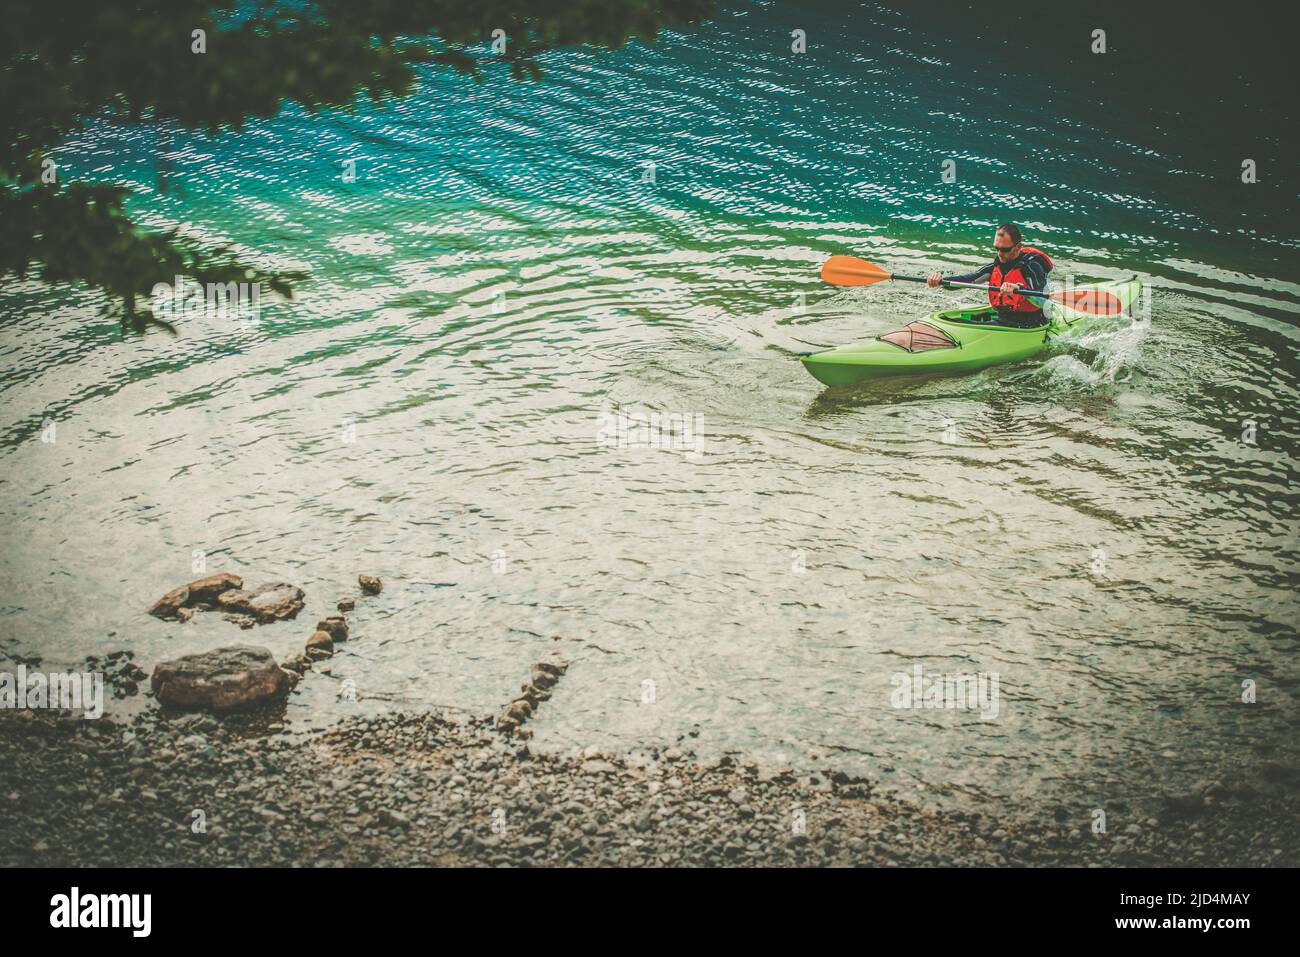 Caucasian Kayaker in His Green Canoe Finishing His River Trip Heading to Stony Shore. Watersport and Recreation Theme. Stock Photo